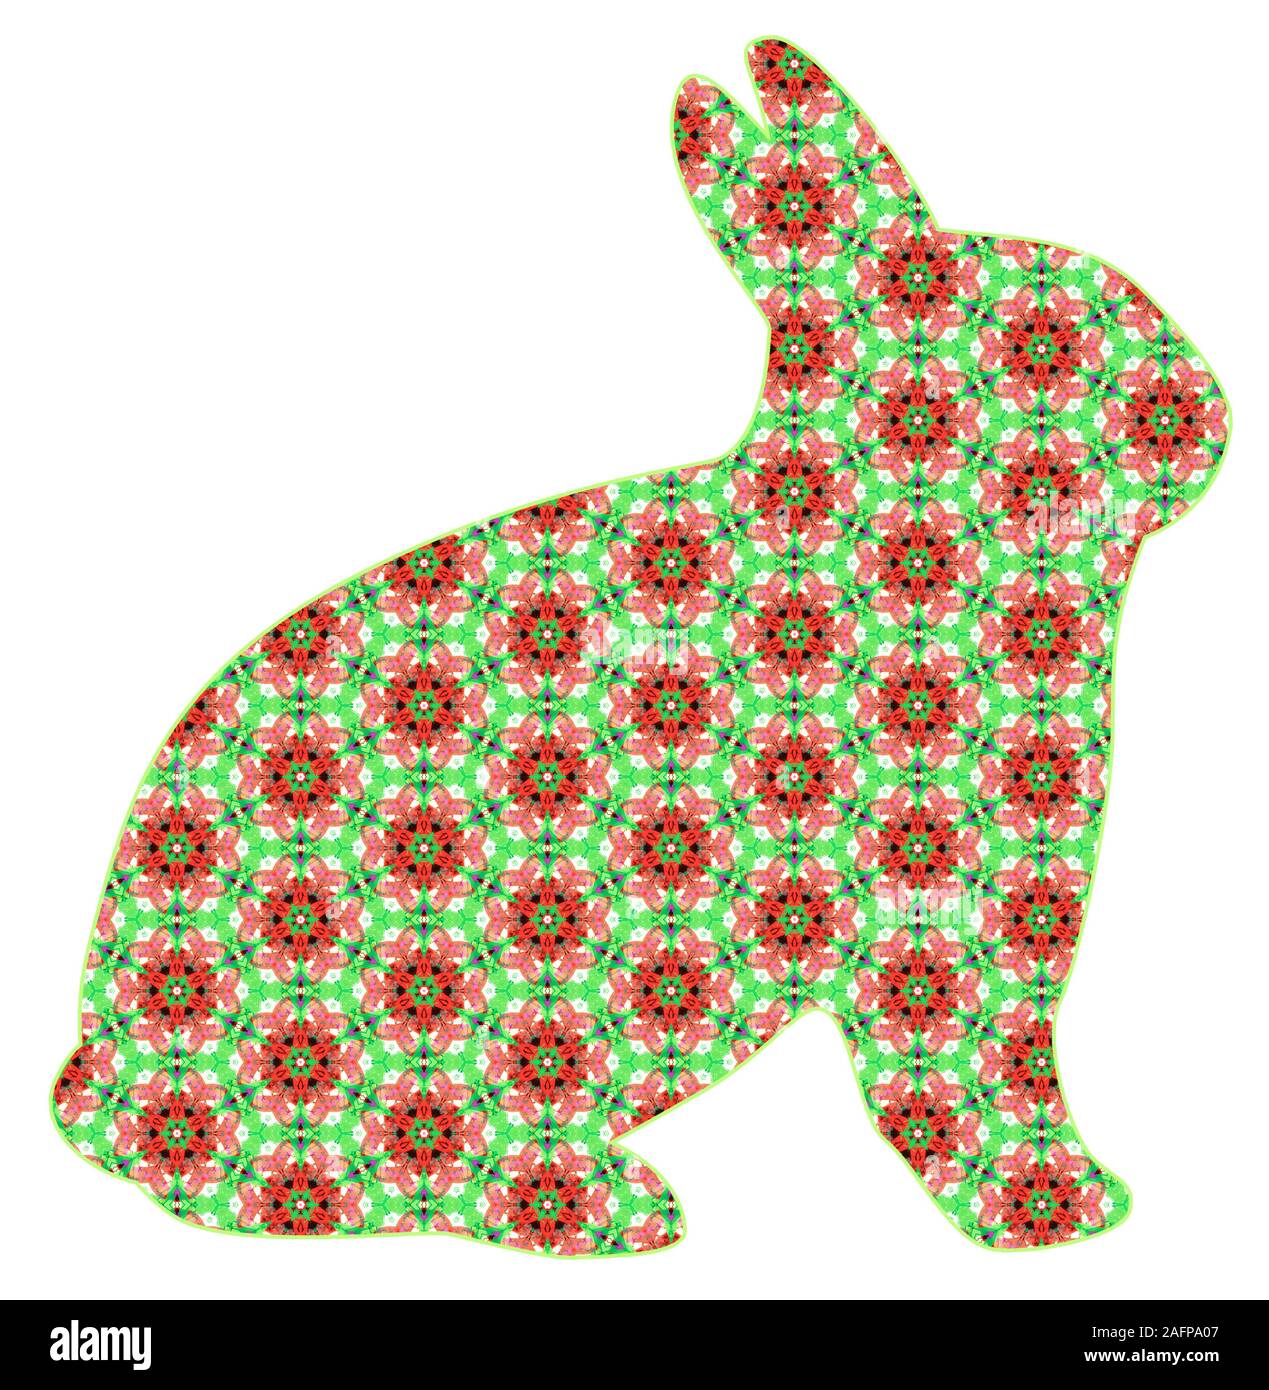 Cute gold red and green patterned Christmas bunny rabbit for the holiday season cut out isolated on white essential graphic element design resource Stock Photo